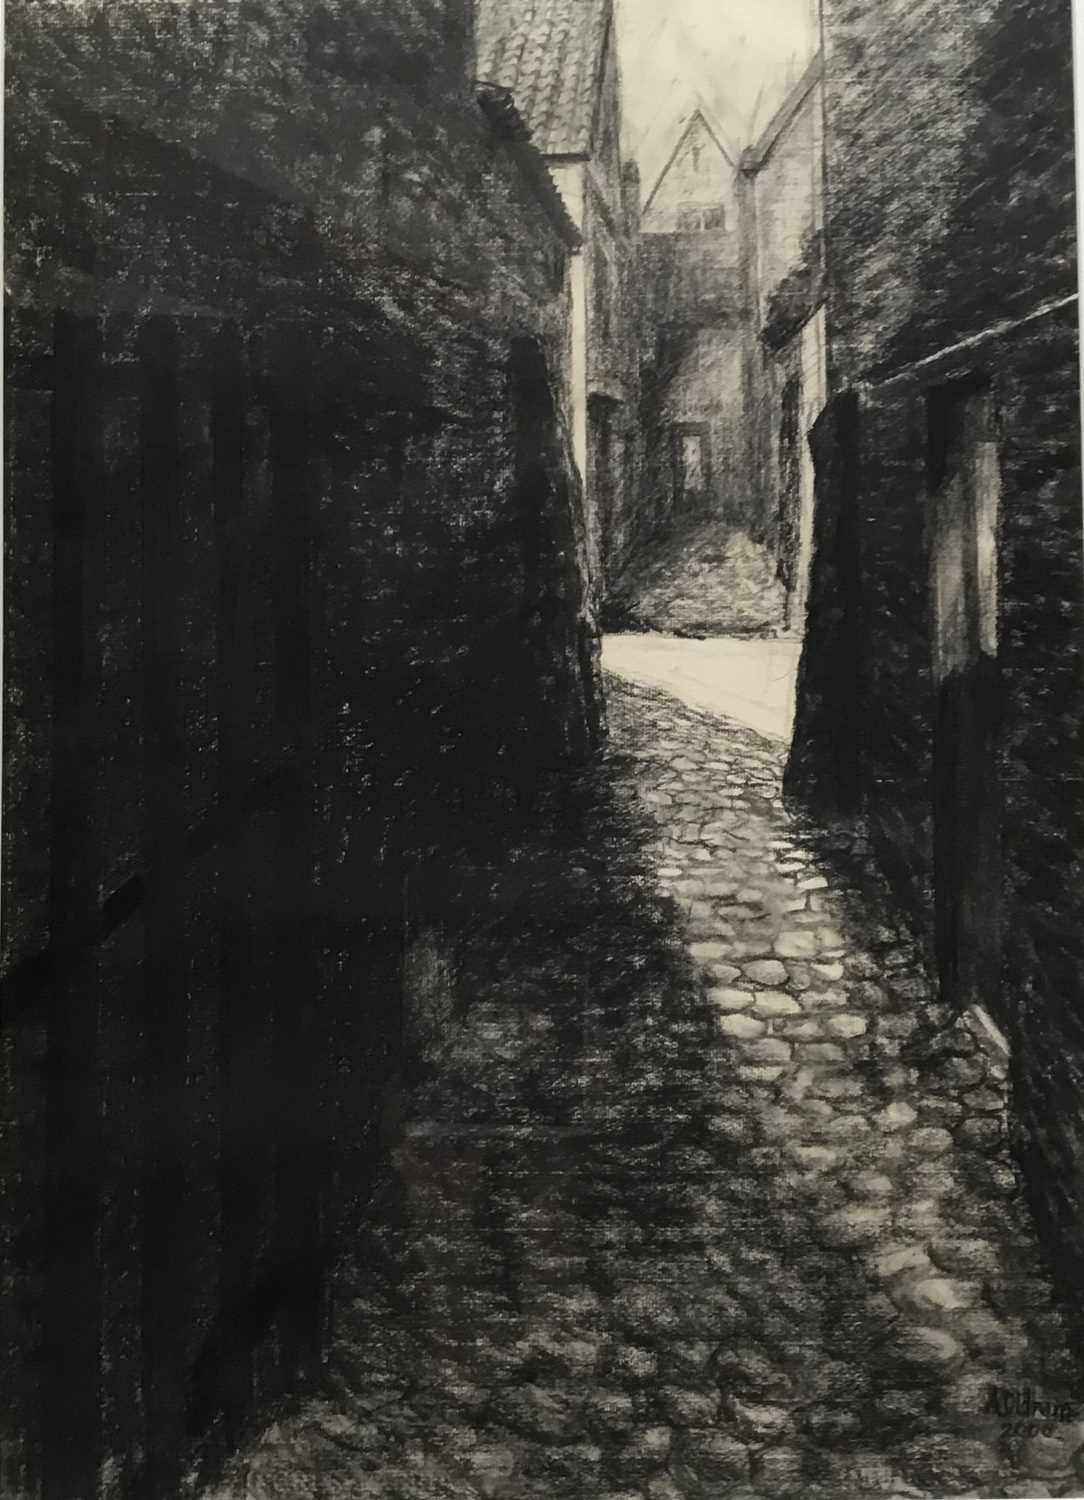 Lot 30 - Arthur Oldham (Contemporary) charcoal, Bruges Alleyway, signed and dated 2000, 69 x 48cm, glazed frame